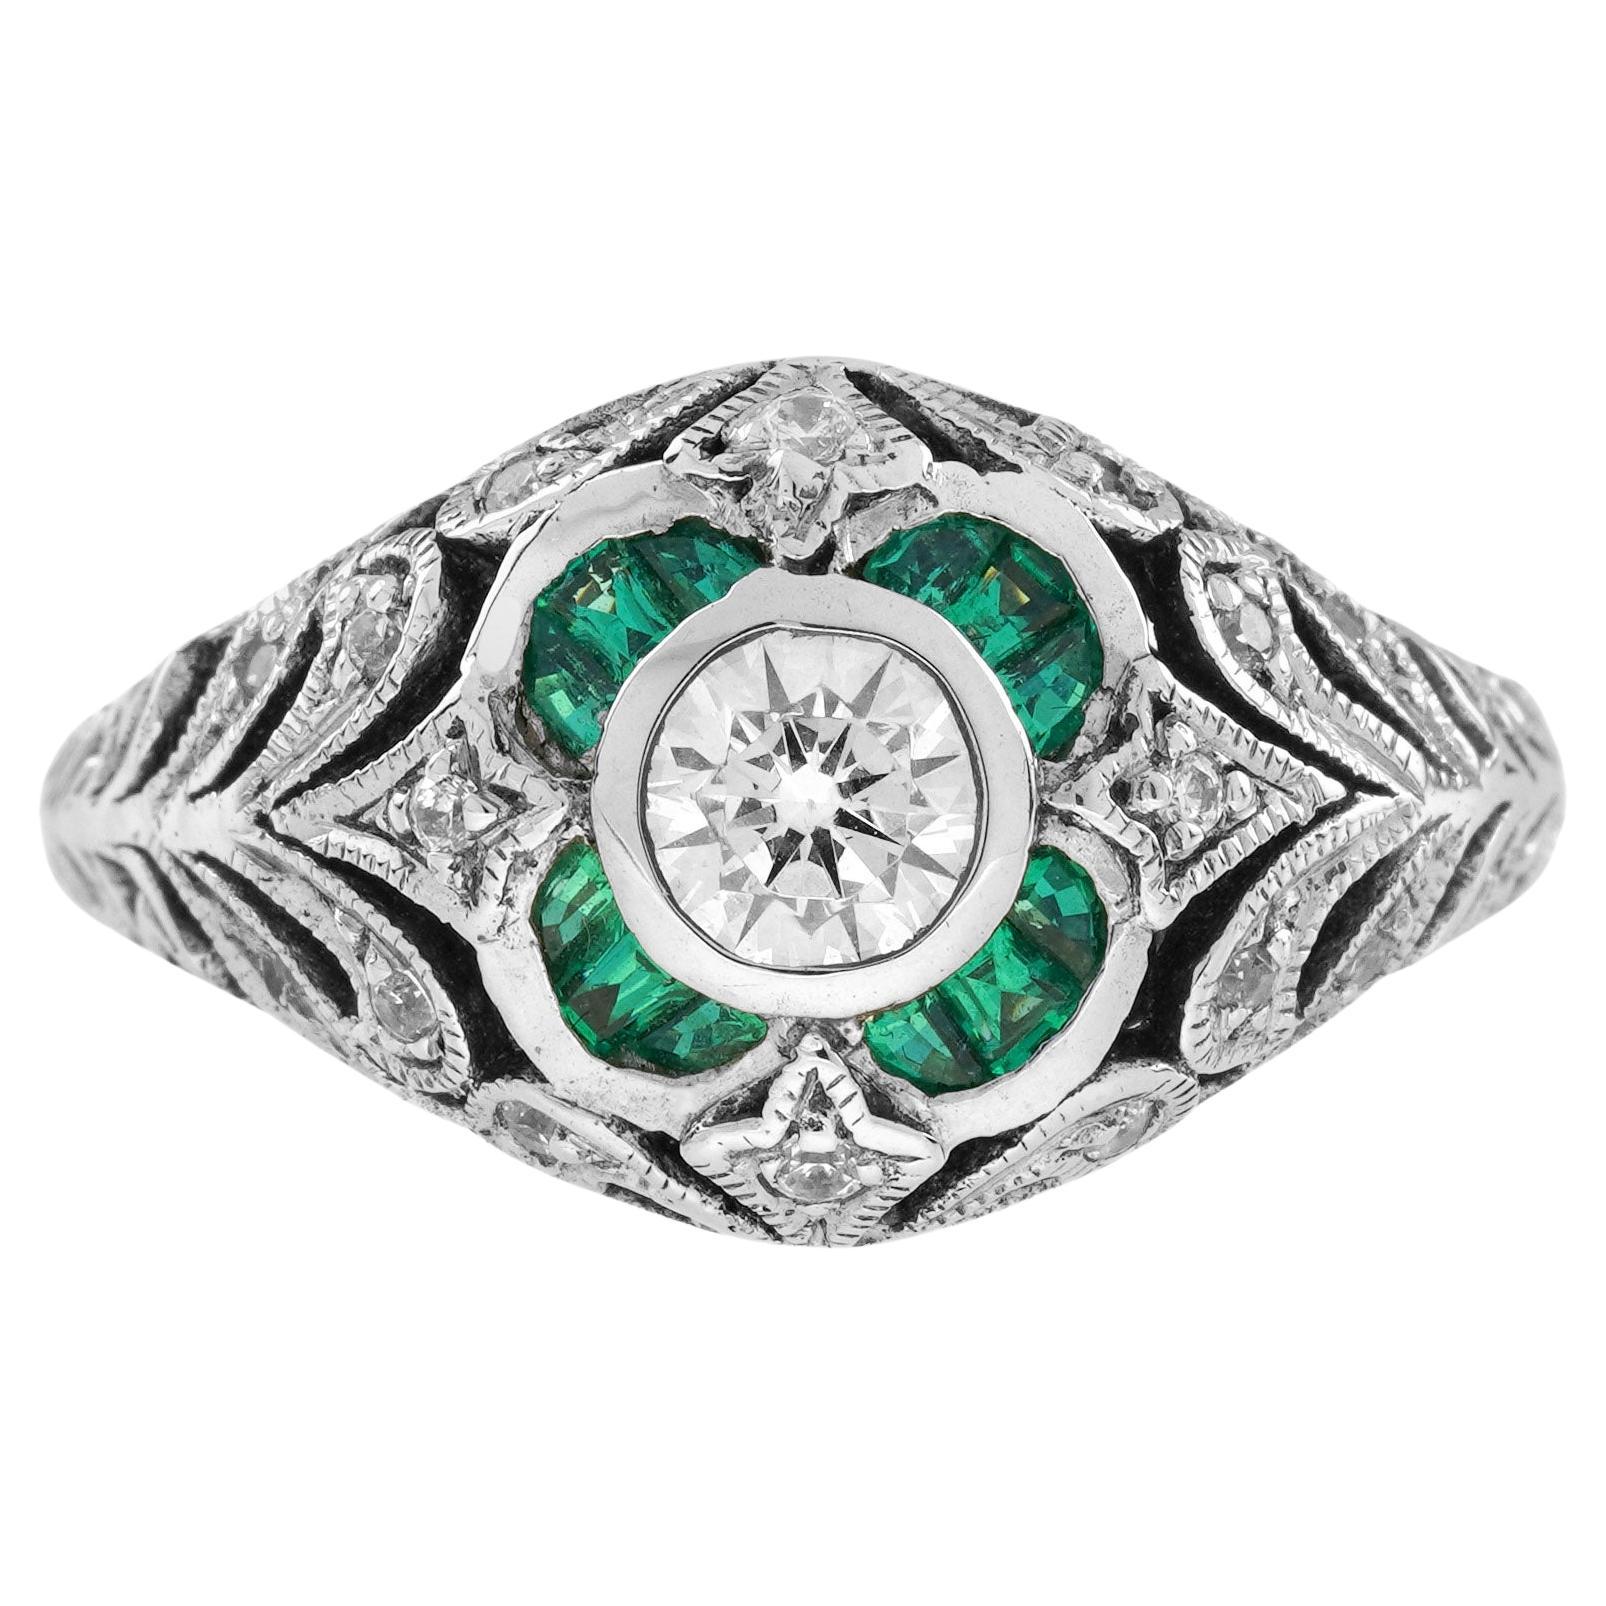 Diamond and Emerald Art Deco Style Floral Engraved Ring in 18K White Gold For Sale